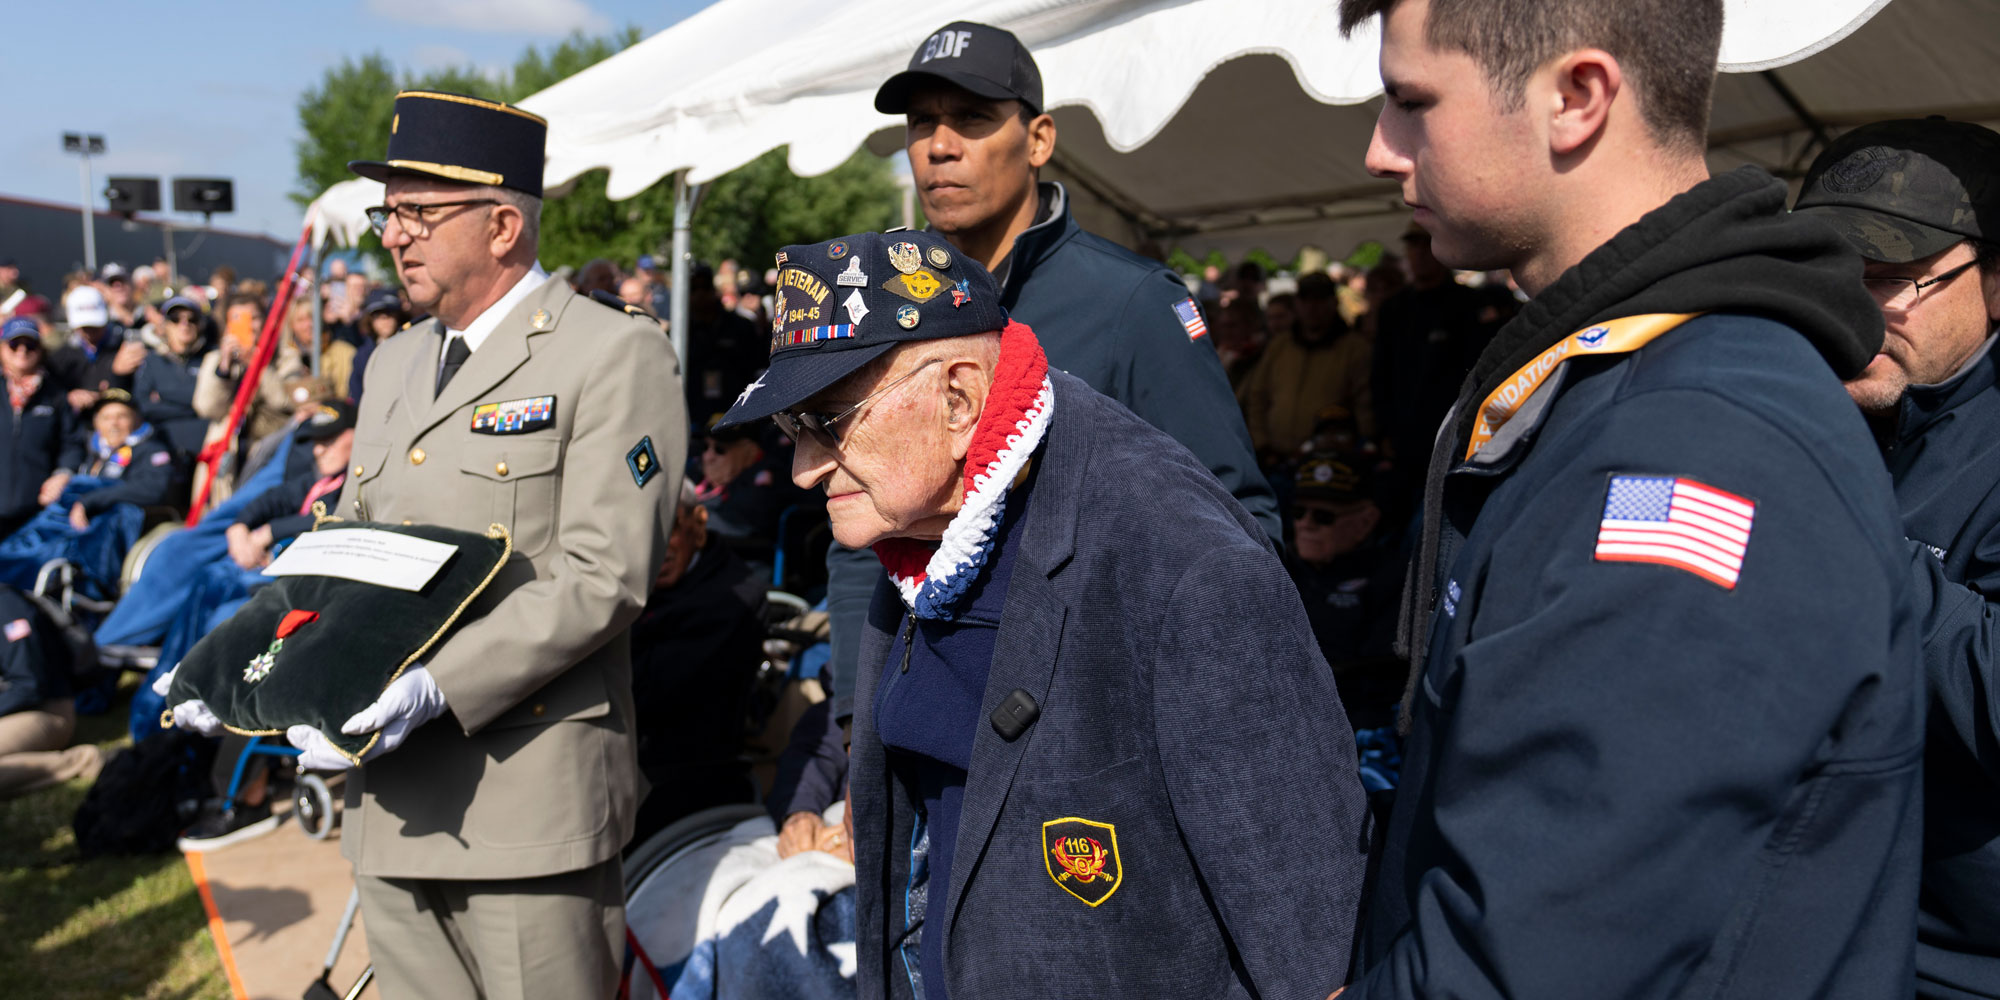 A group of male veterans and active duty military, including French military, at an outdoor ceremony. An older male veteran, wearing a red, white and blue necklace and ball cap, stands to receive his honor